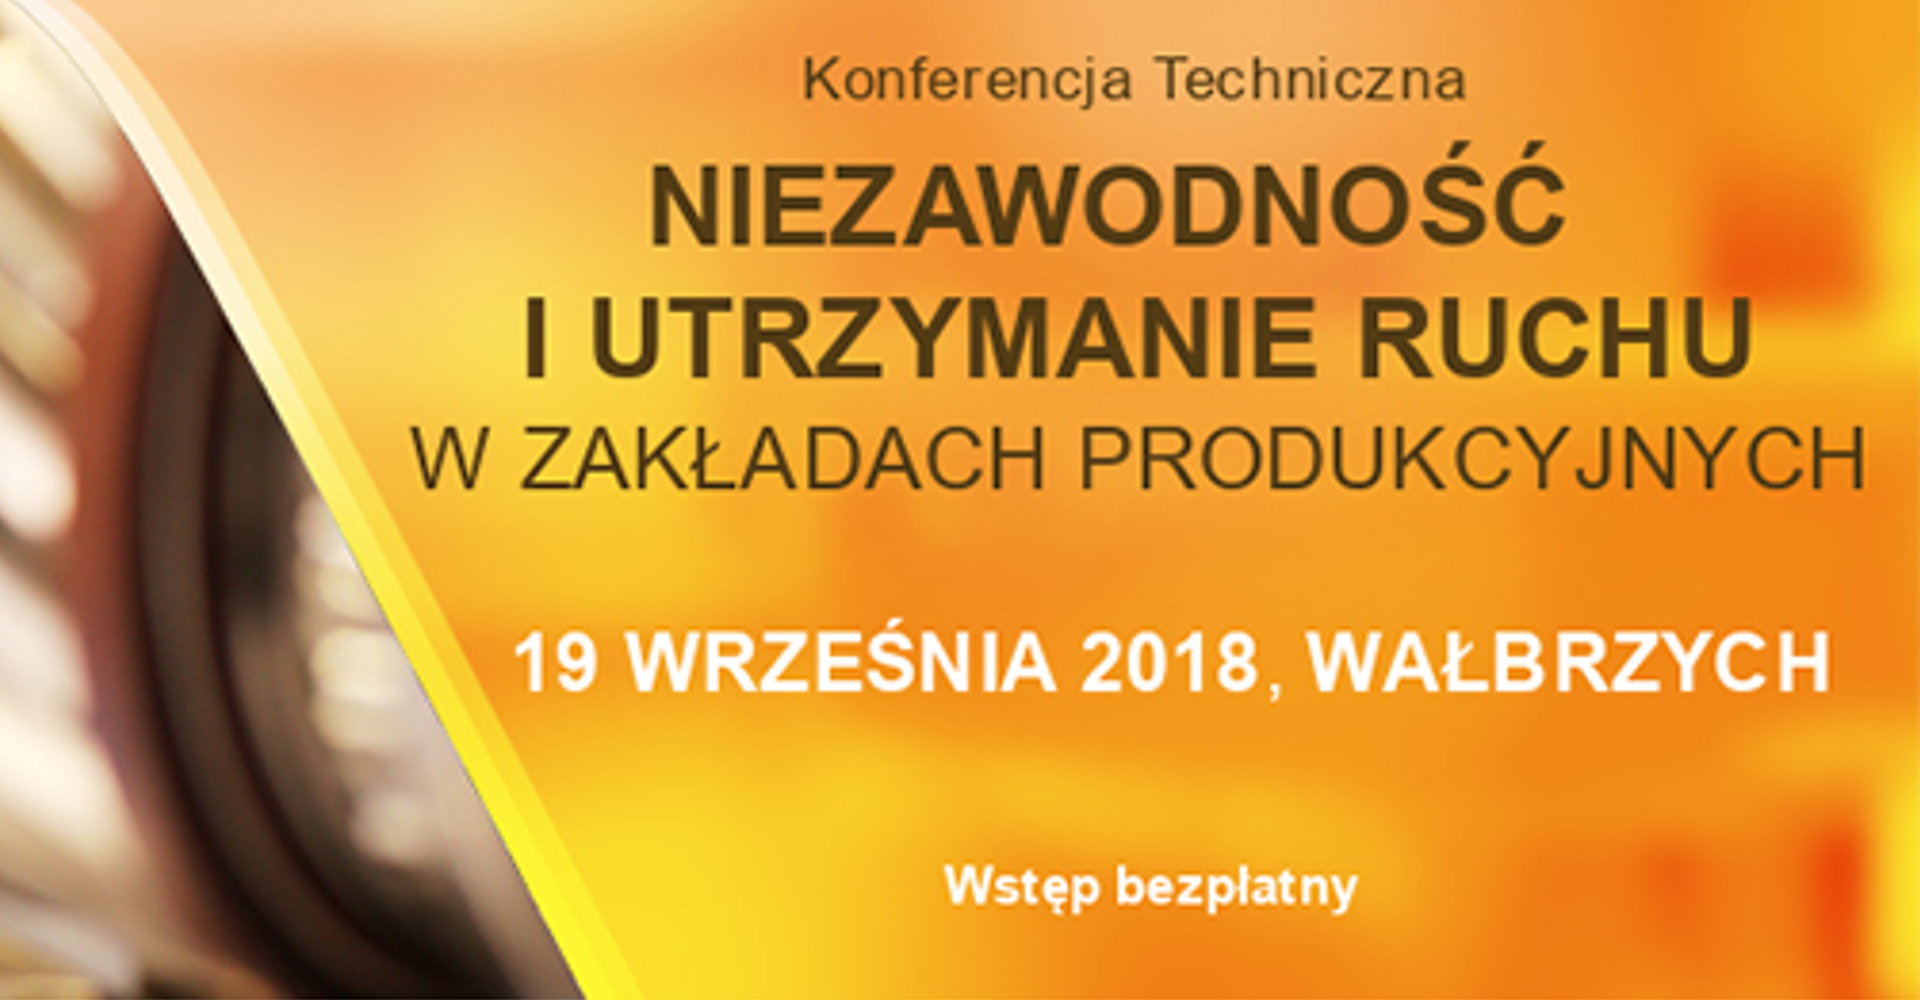 Conference "Reliability and Maintenance" 19.09.2018 Walbrzych